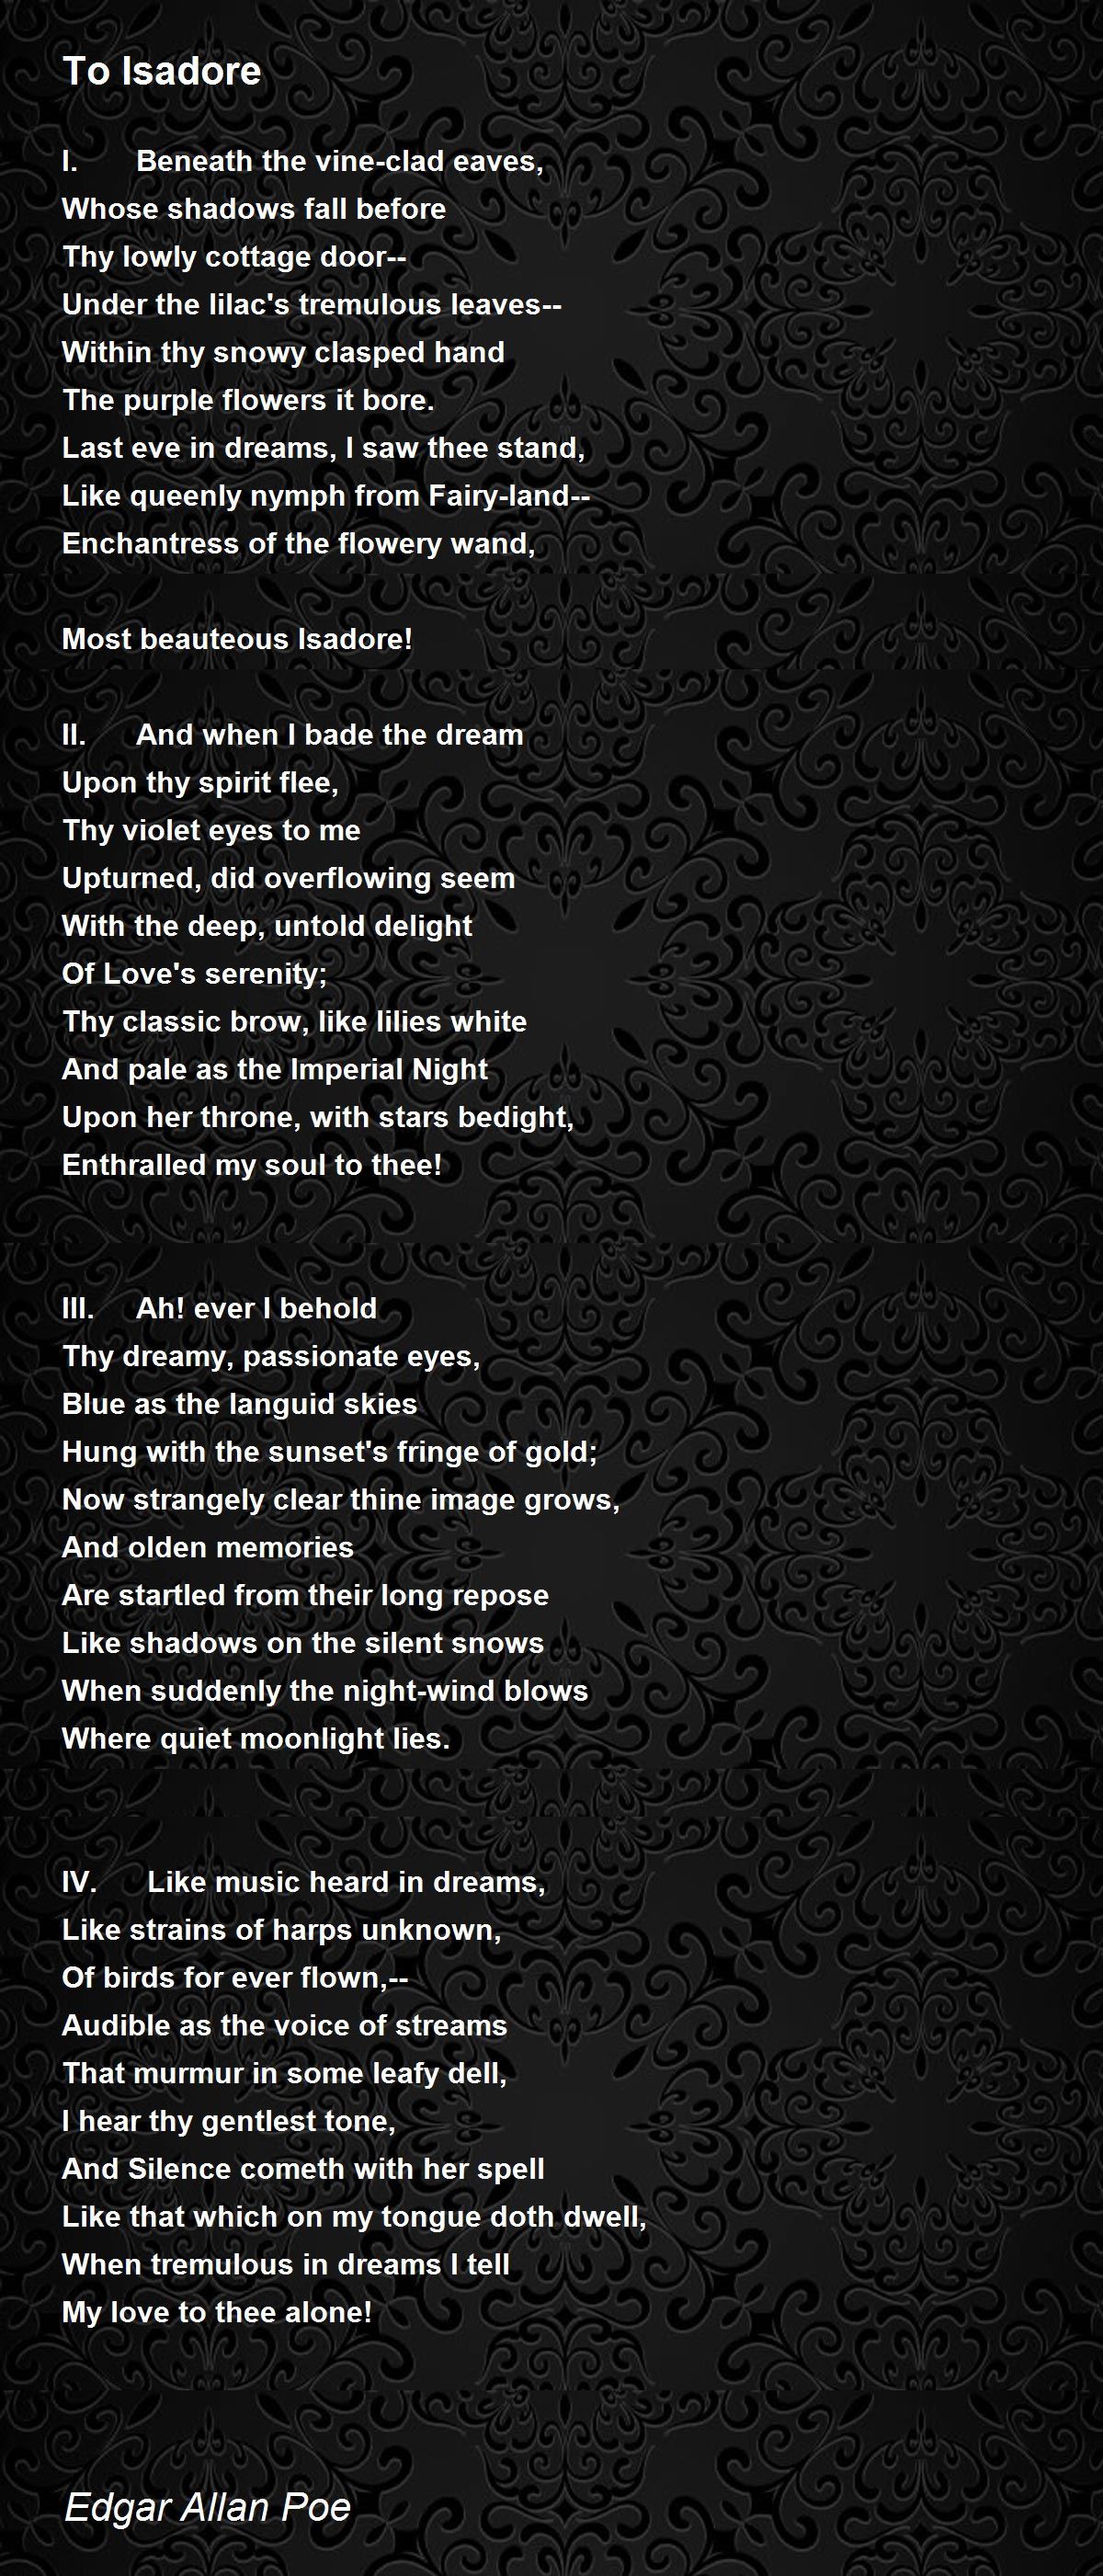 To Isadore by Edgar Allan Poe - To Isadore Poem